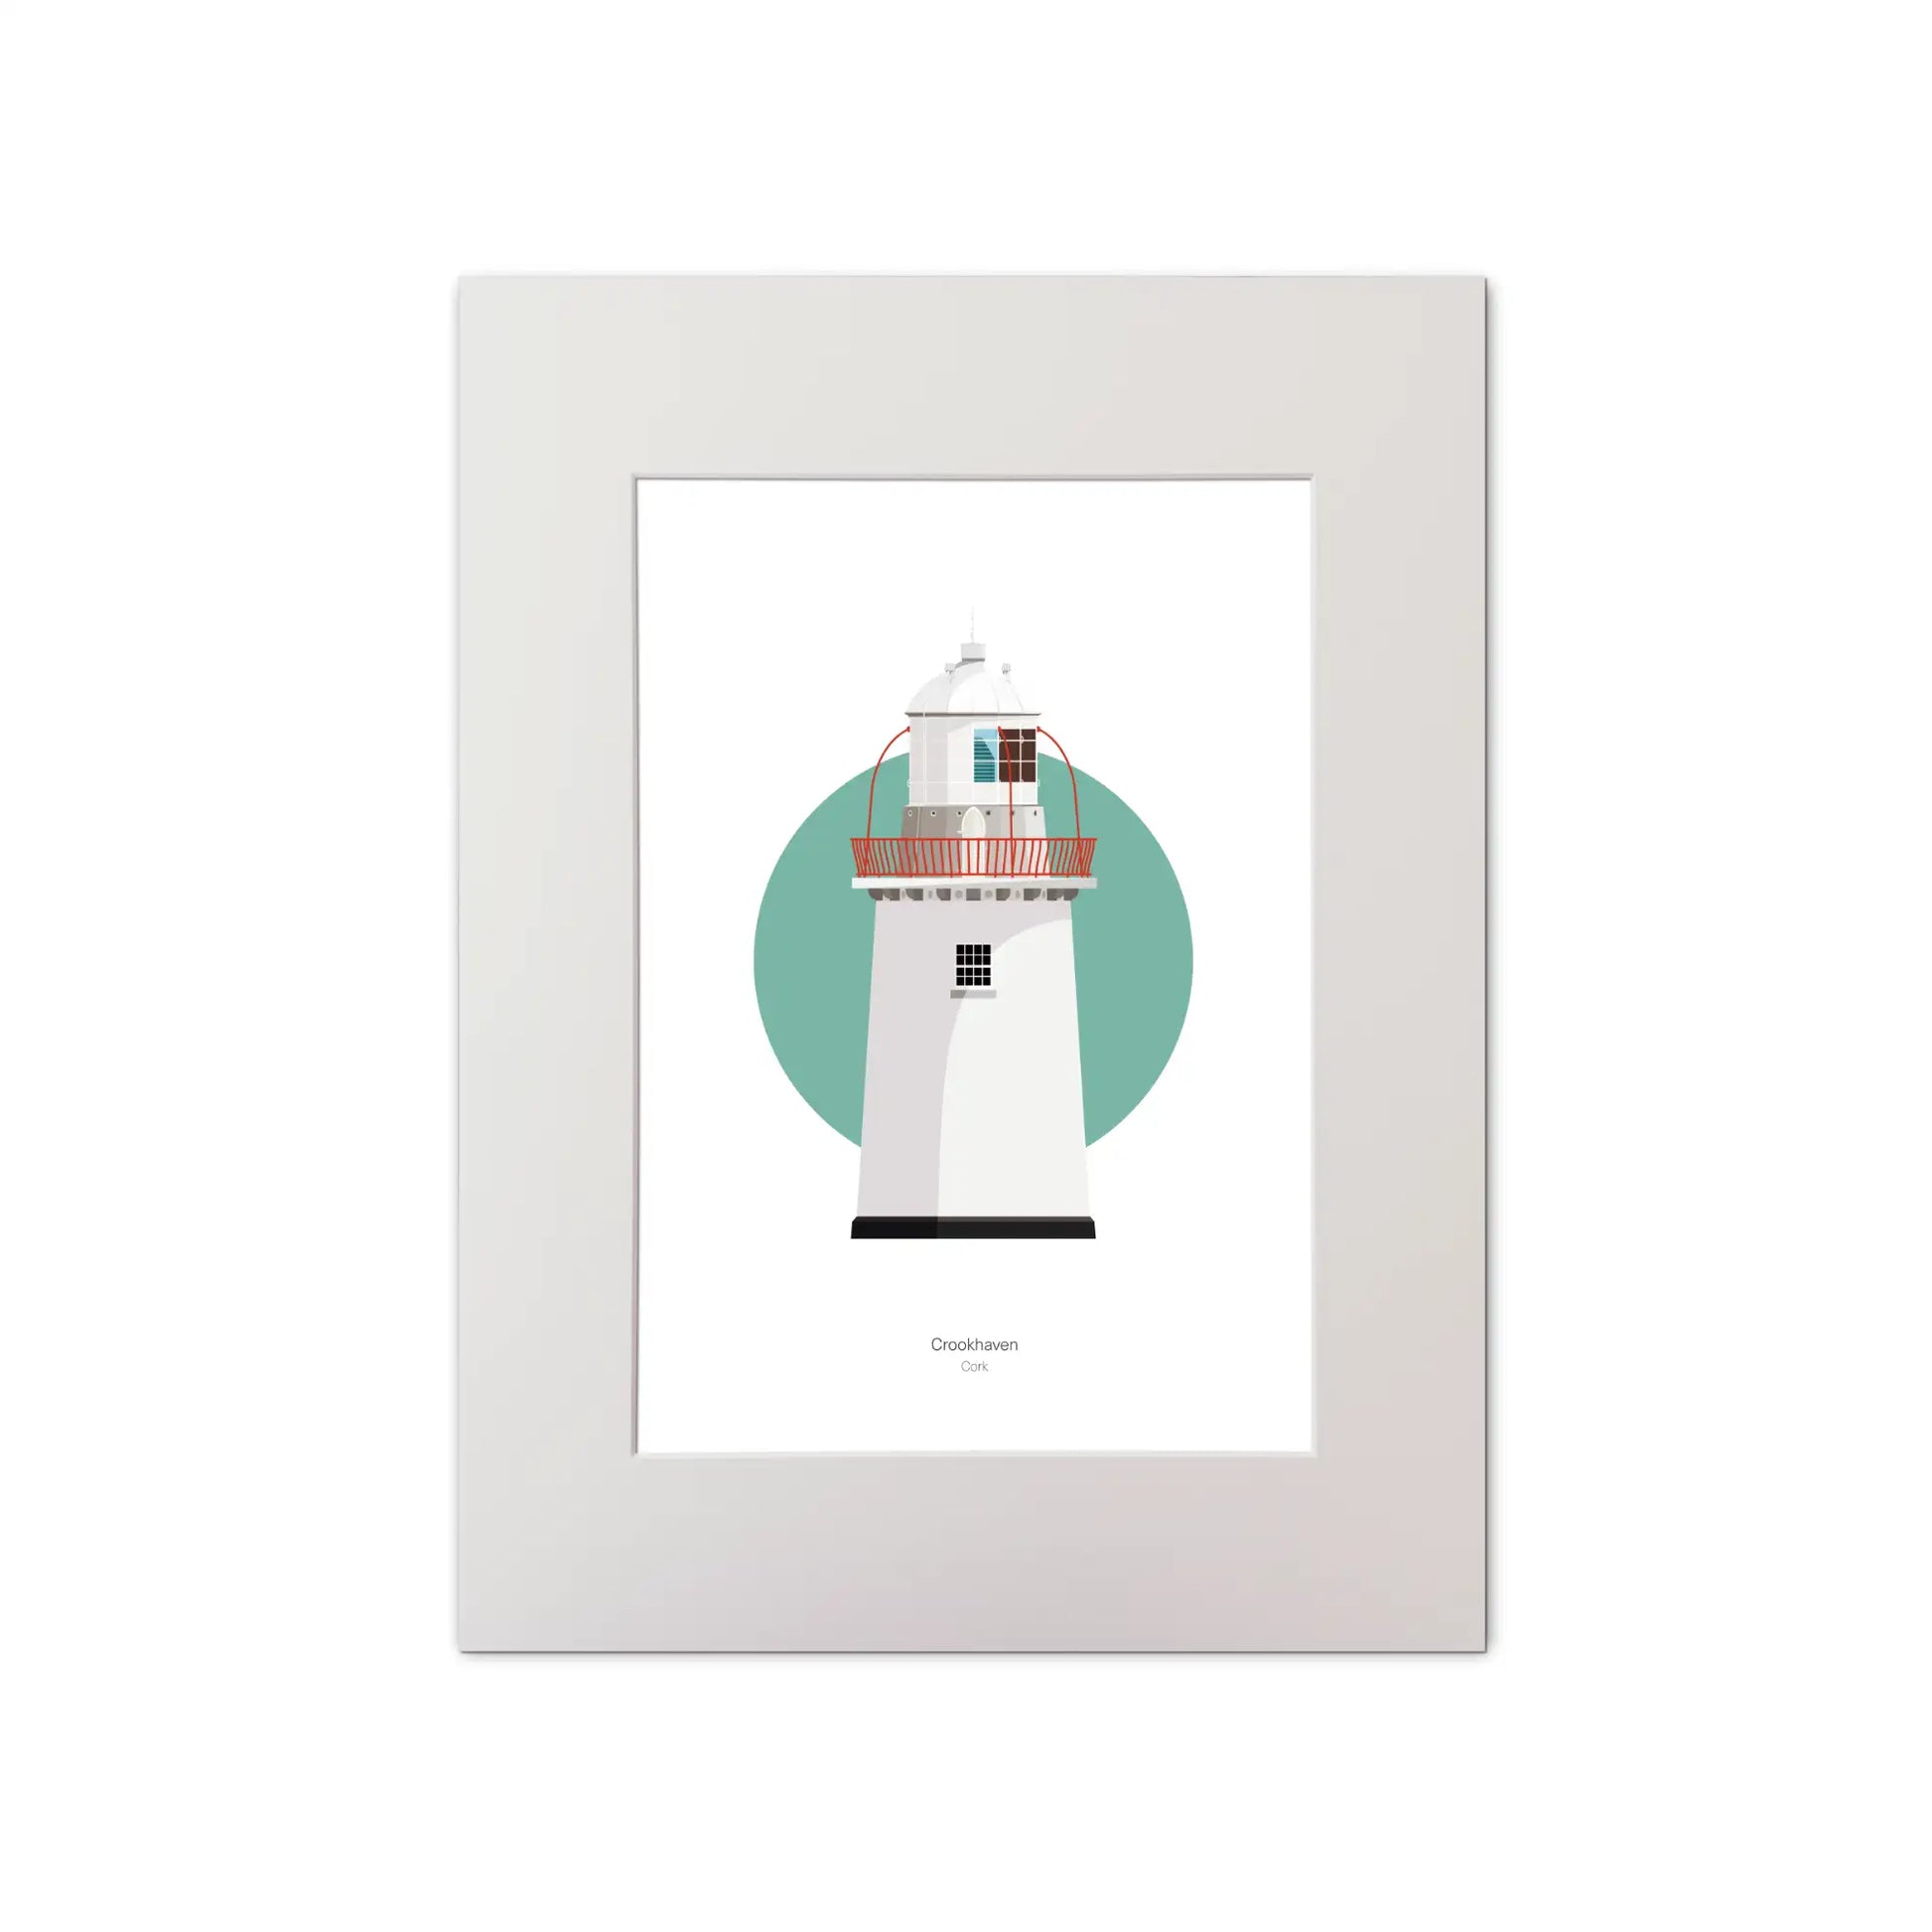 Illustration of Crookhaven lighthouse on a white background inside light blue square, mounted and measuring 30x40cm.